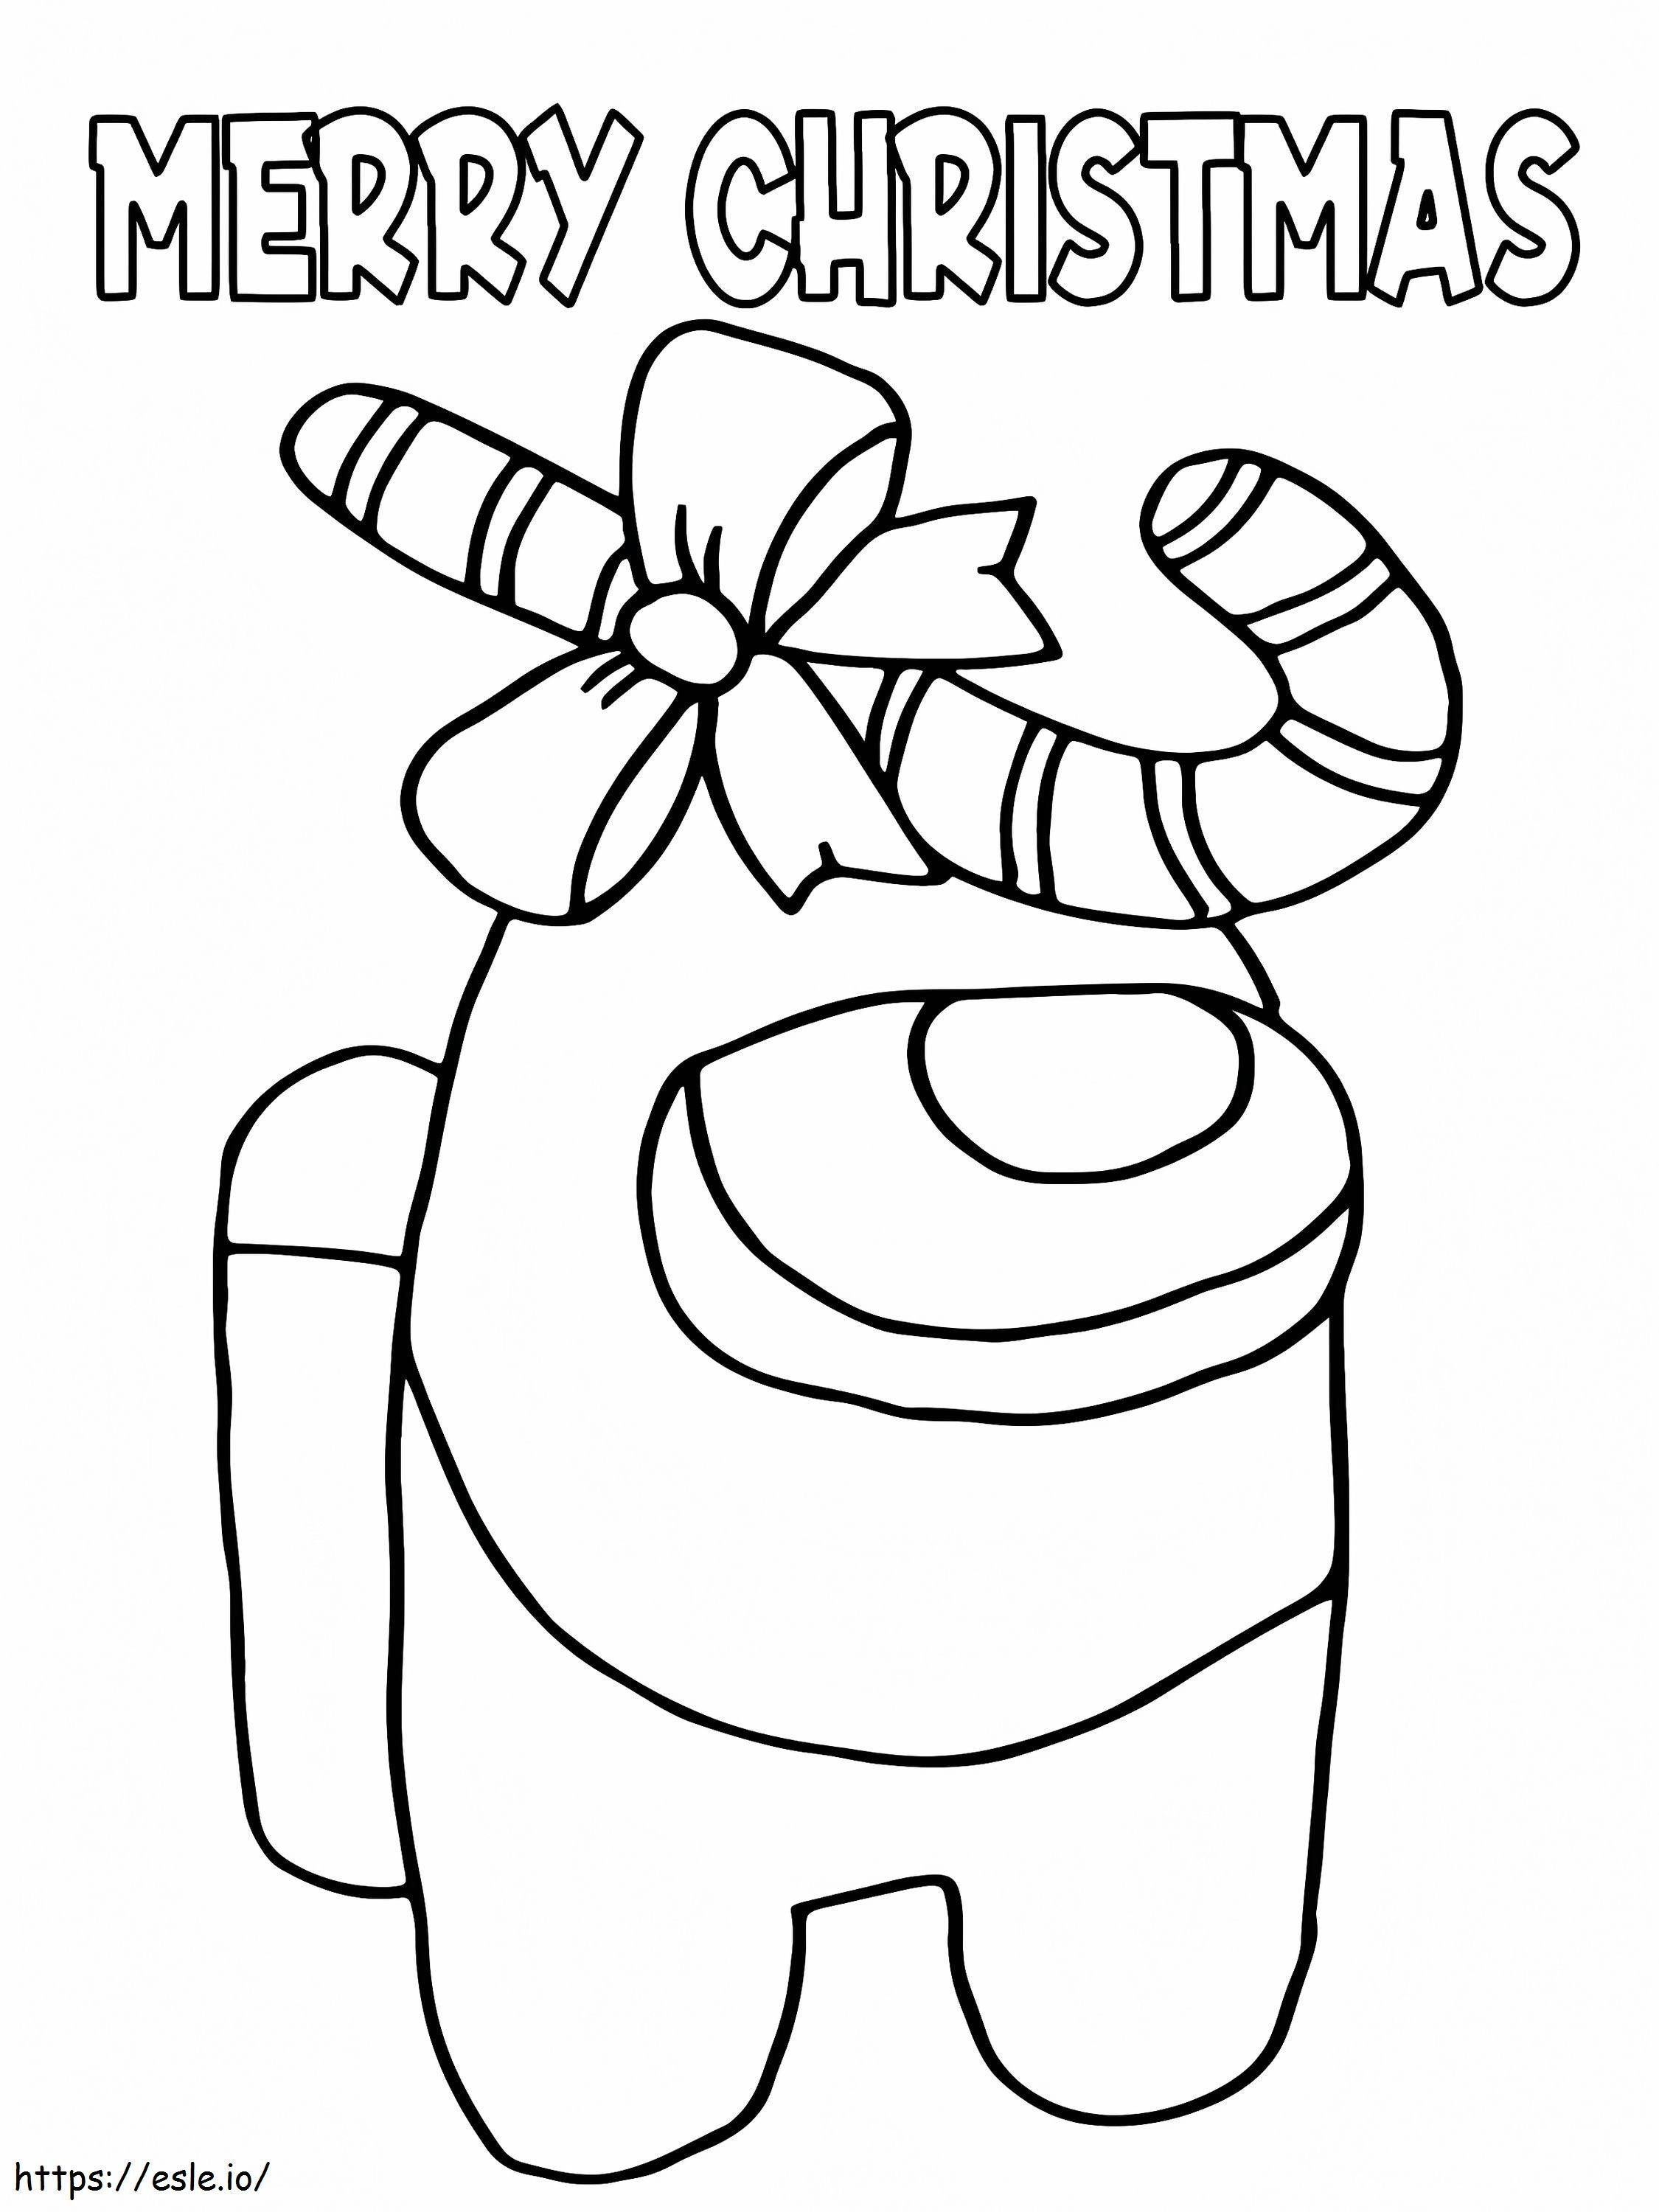 Among Us Merry Christmas Coloring Page 8 Coloring Page